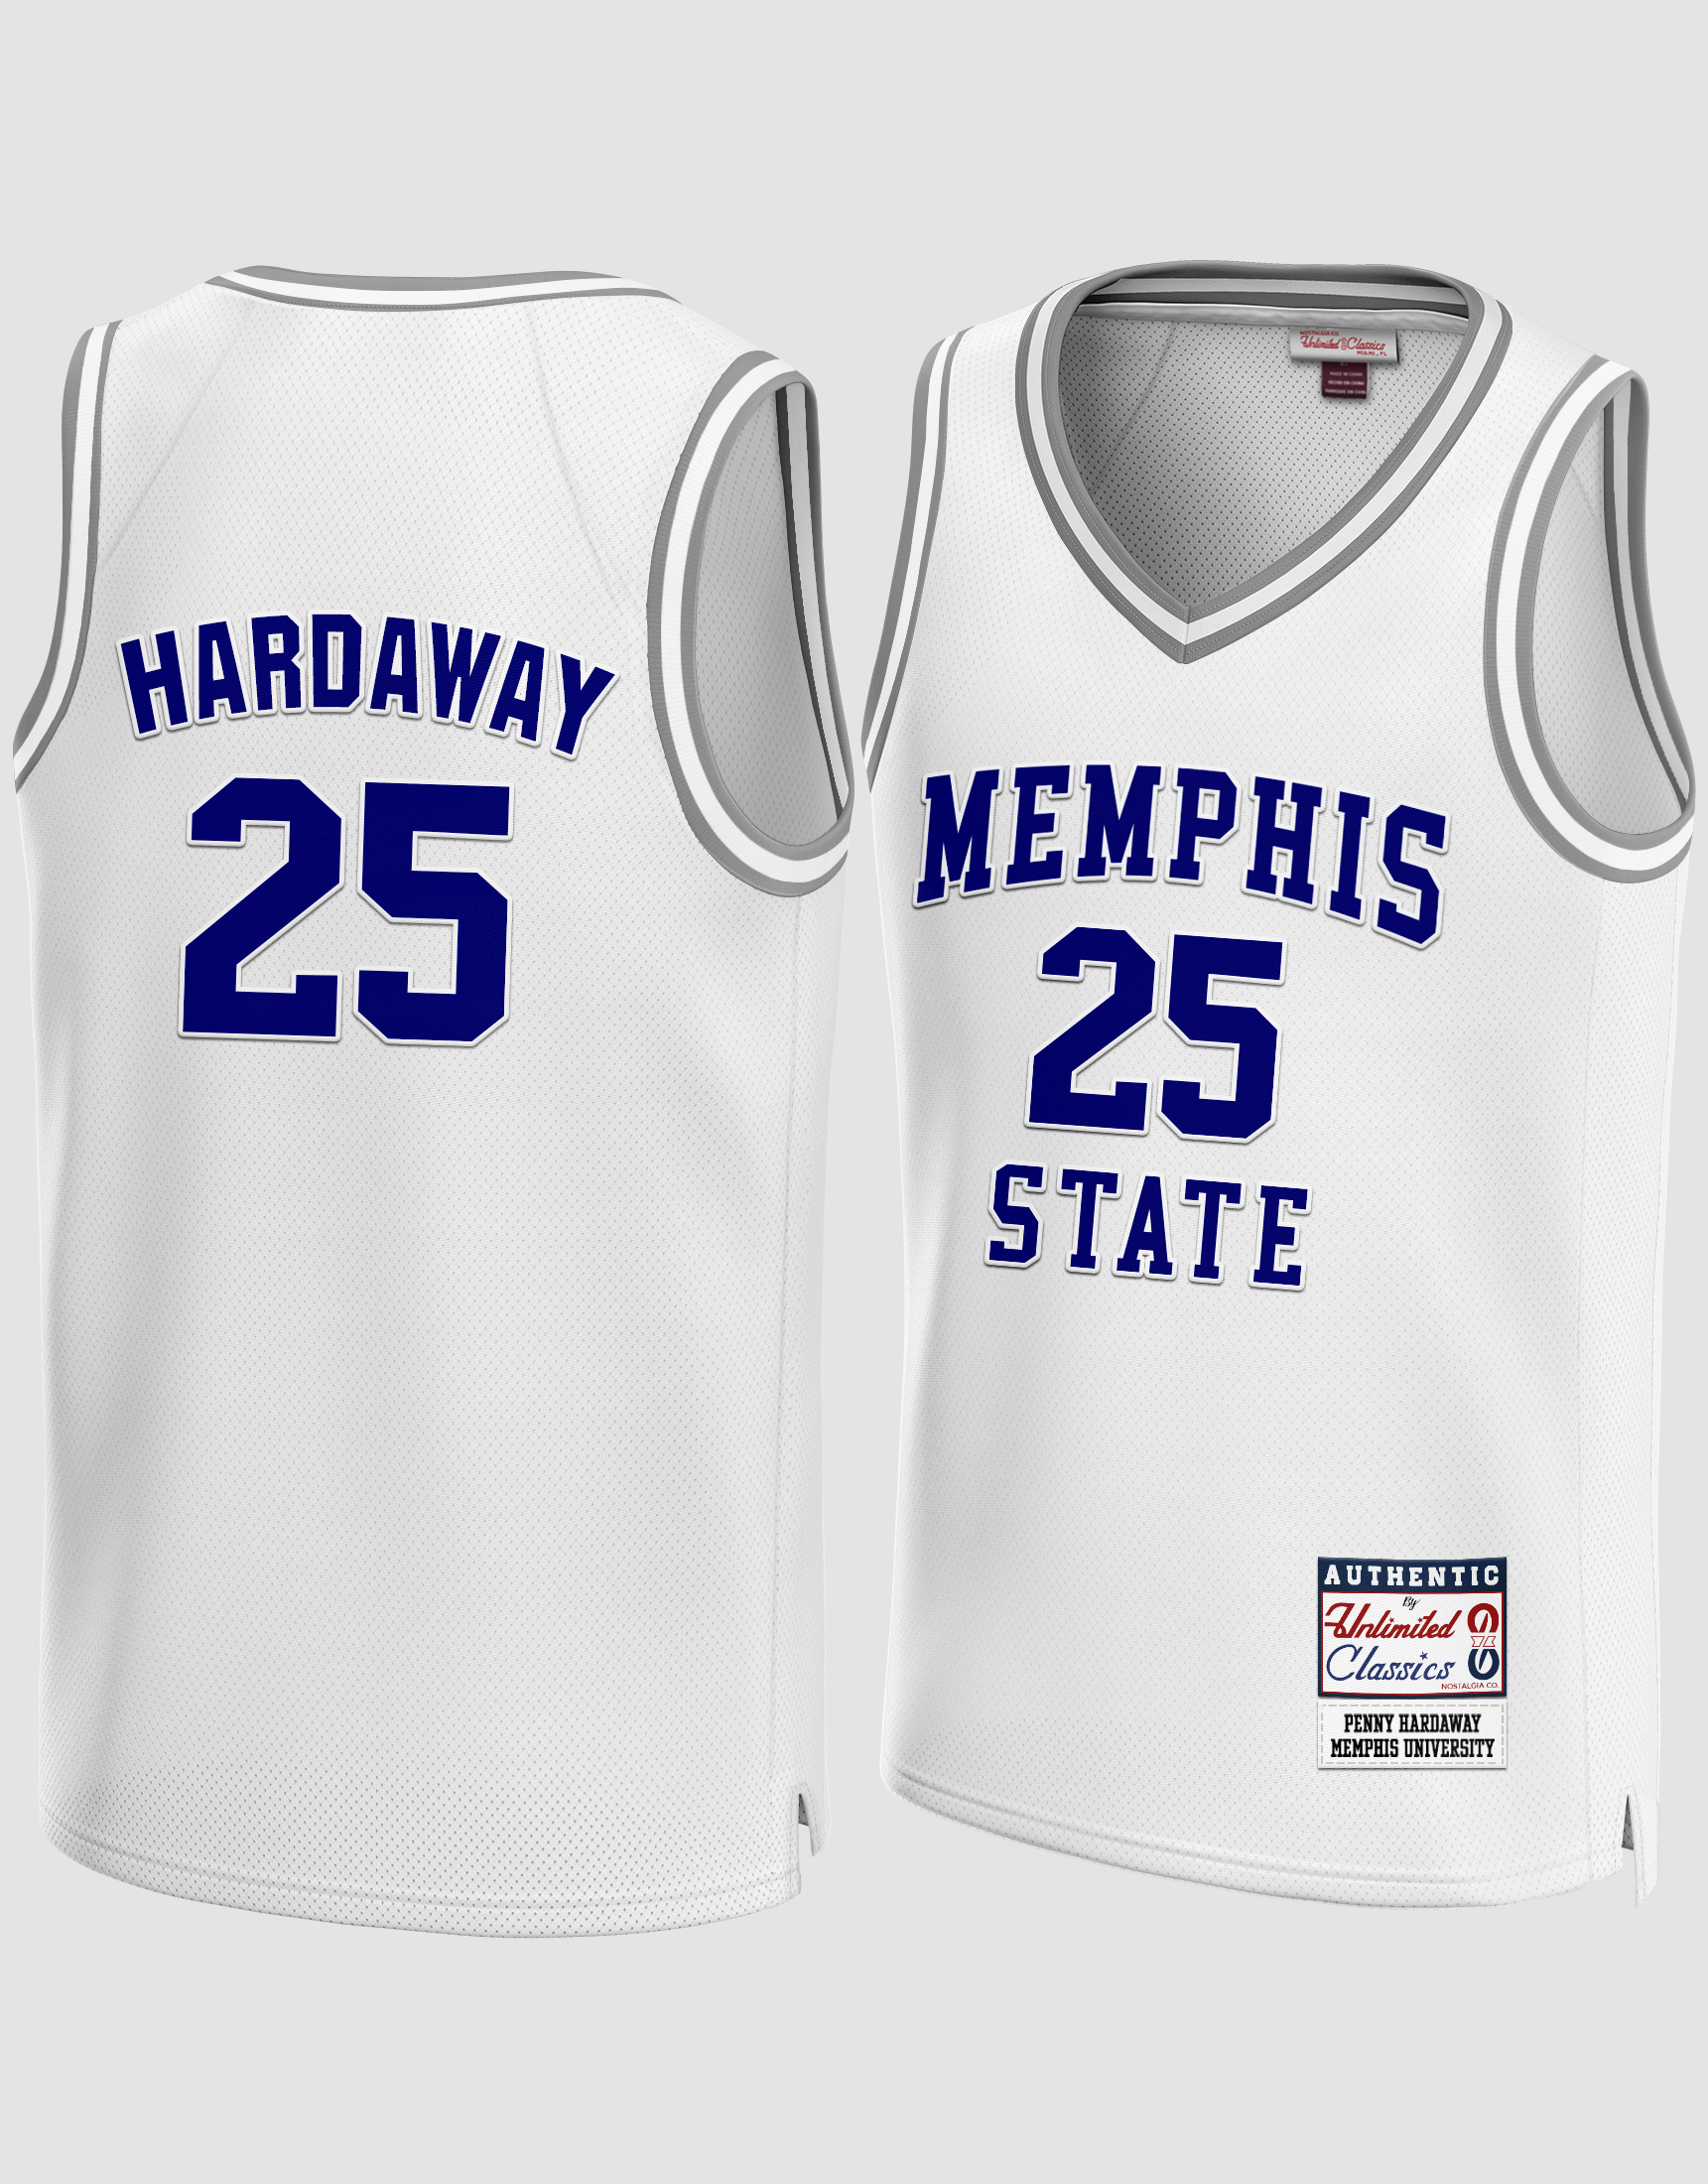 Unlimited Classics Get Hardaway #25 Memphis University Basketball Jersey Online in The USA XL